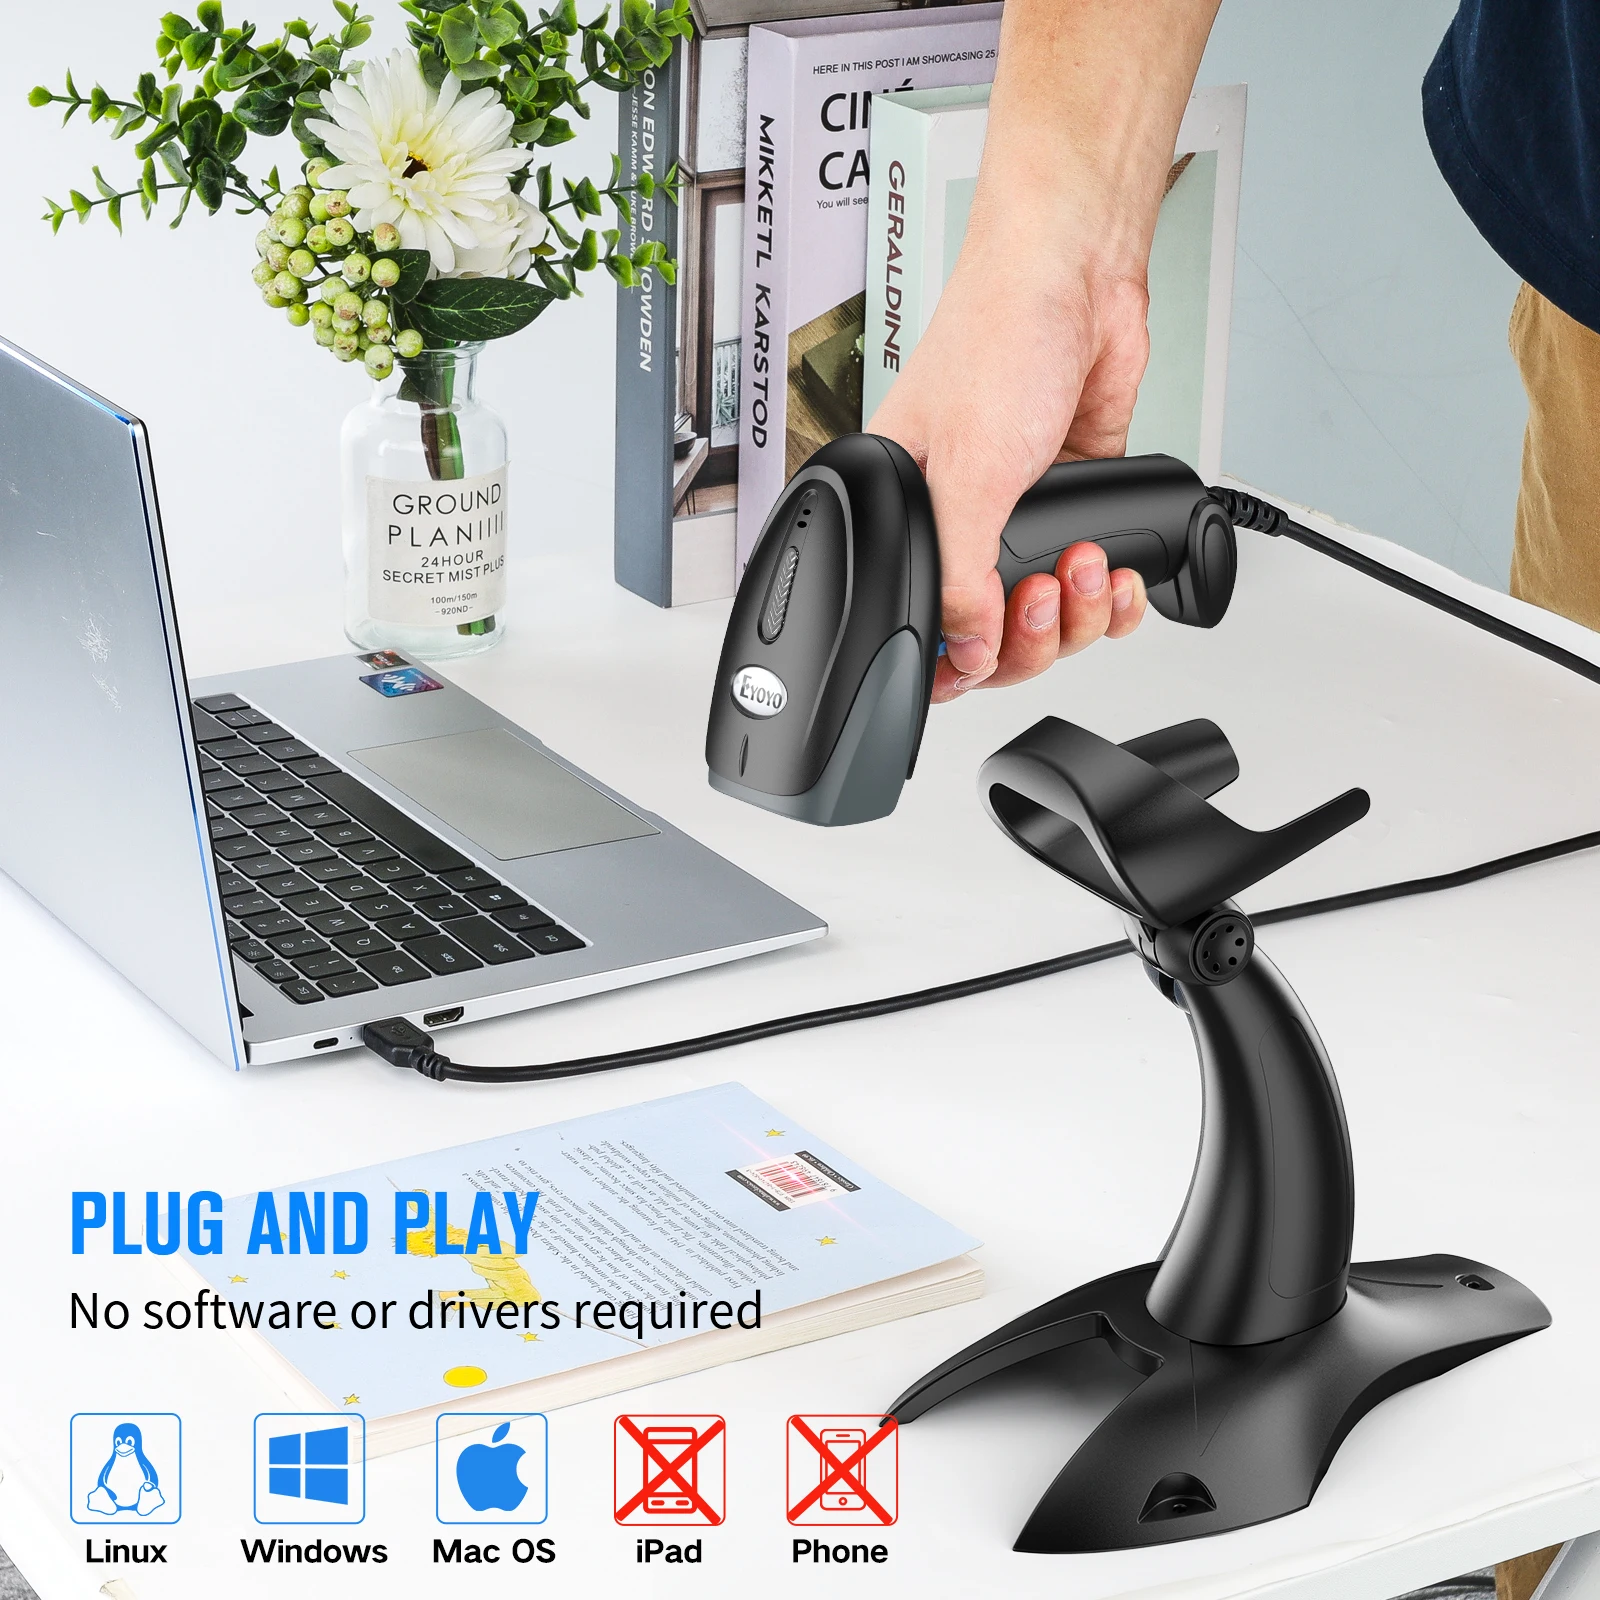 Eyoyo USB Laser 1D Barcode Scanner Wired Handheld Bar Code Scanner Reader Lector De Codigo De Barras Warehouse Inventory Plug & Play Fast & Precise 2M Ultra Long Cable for Library Book 